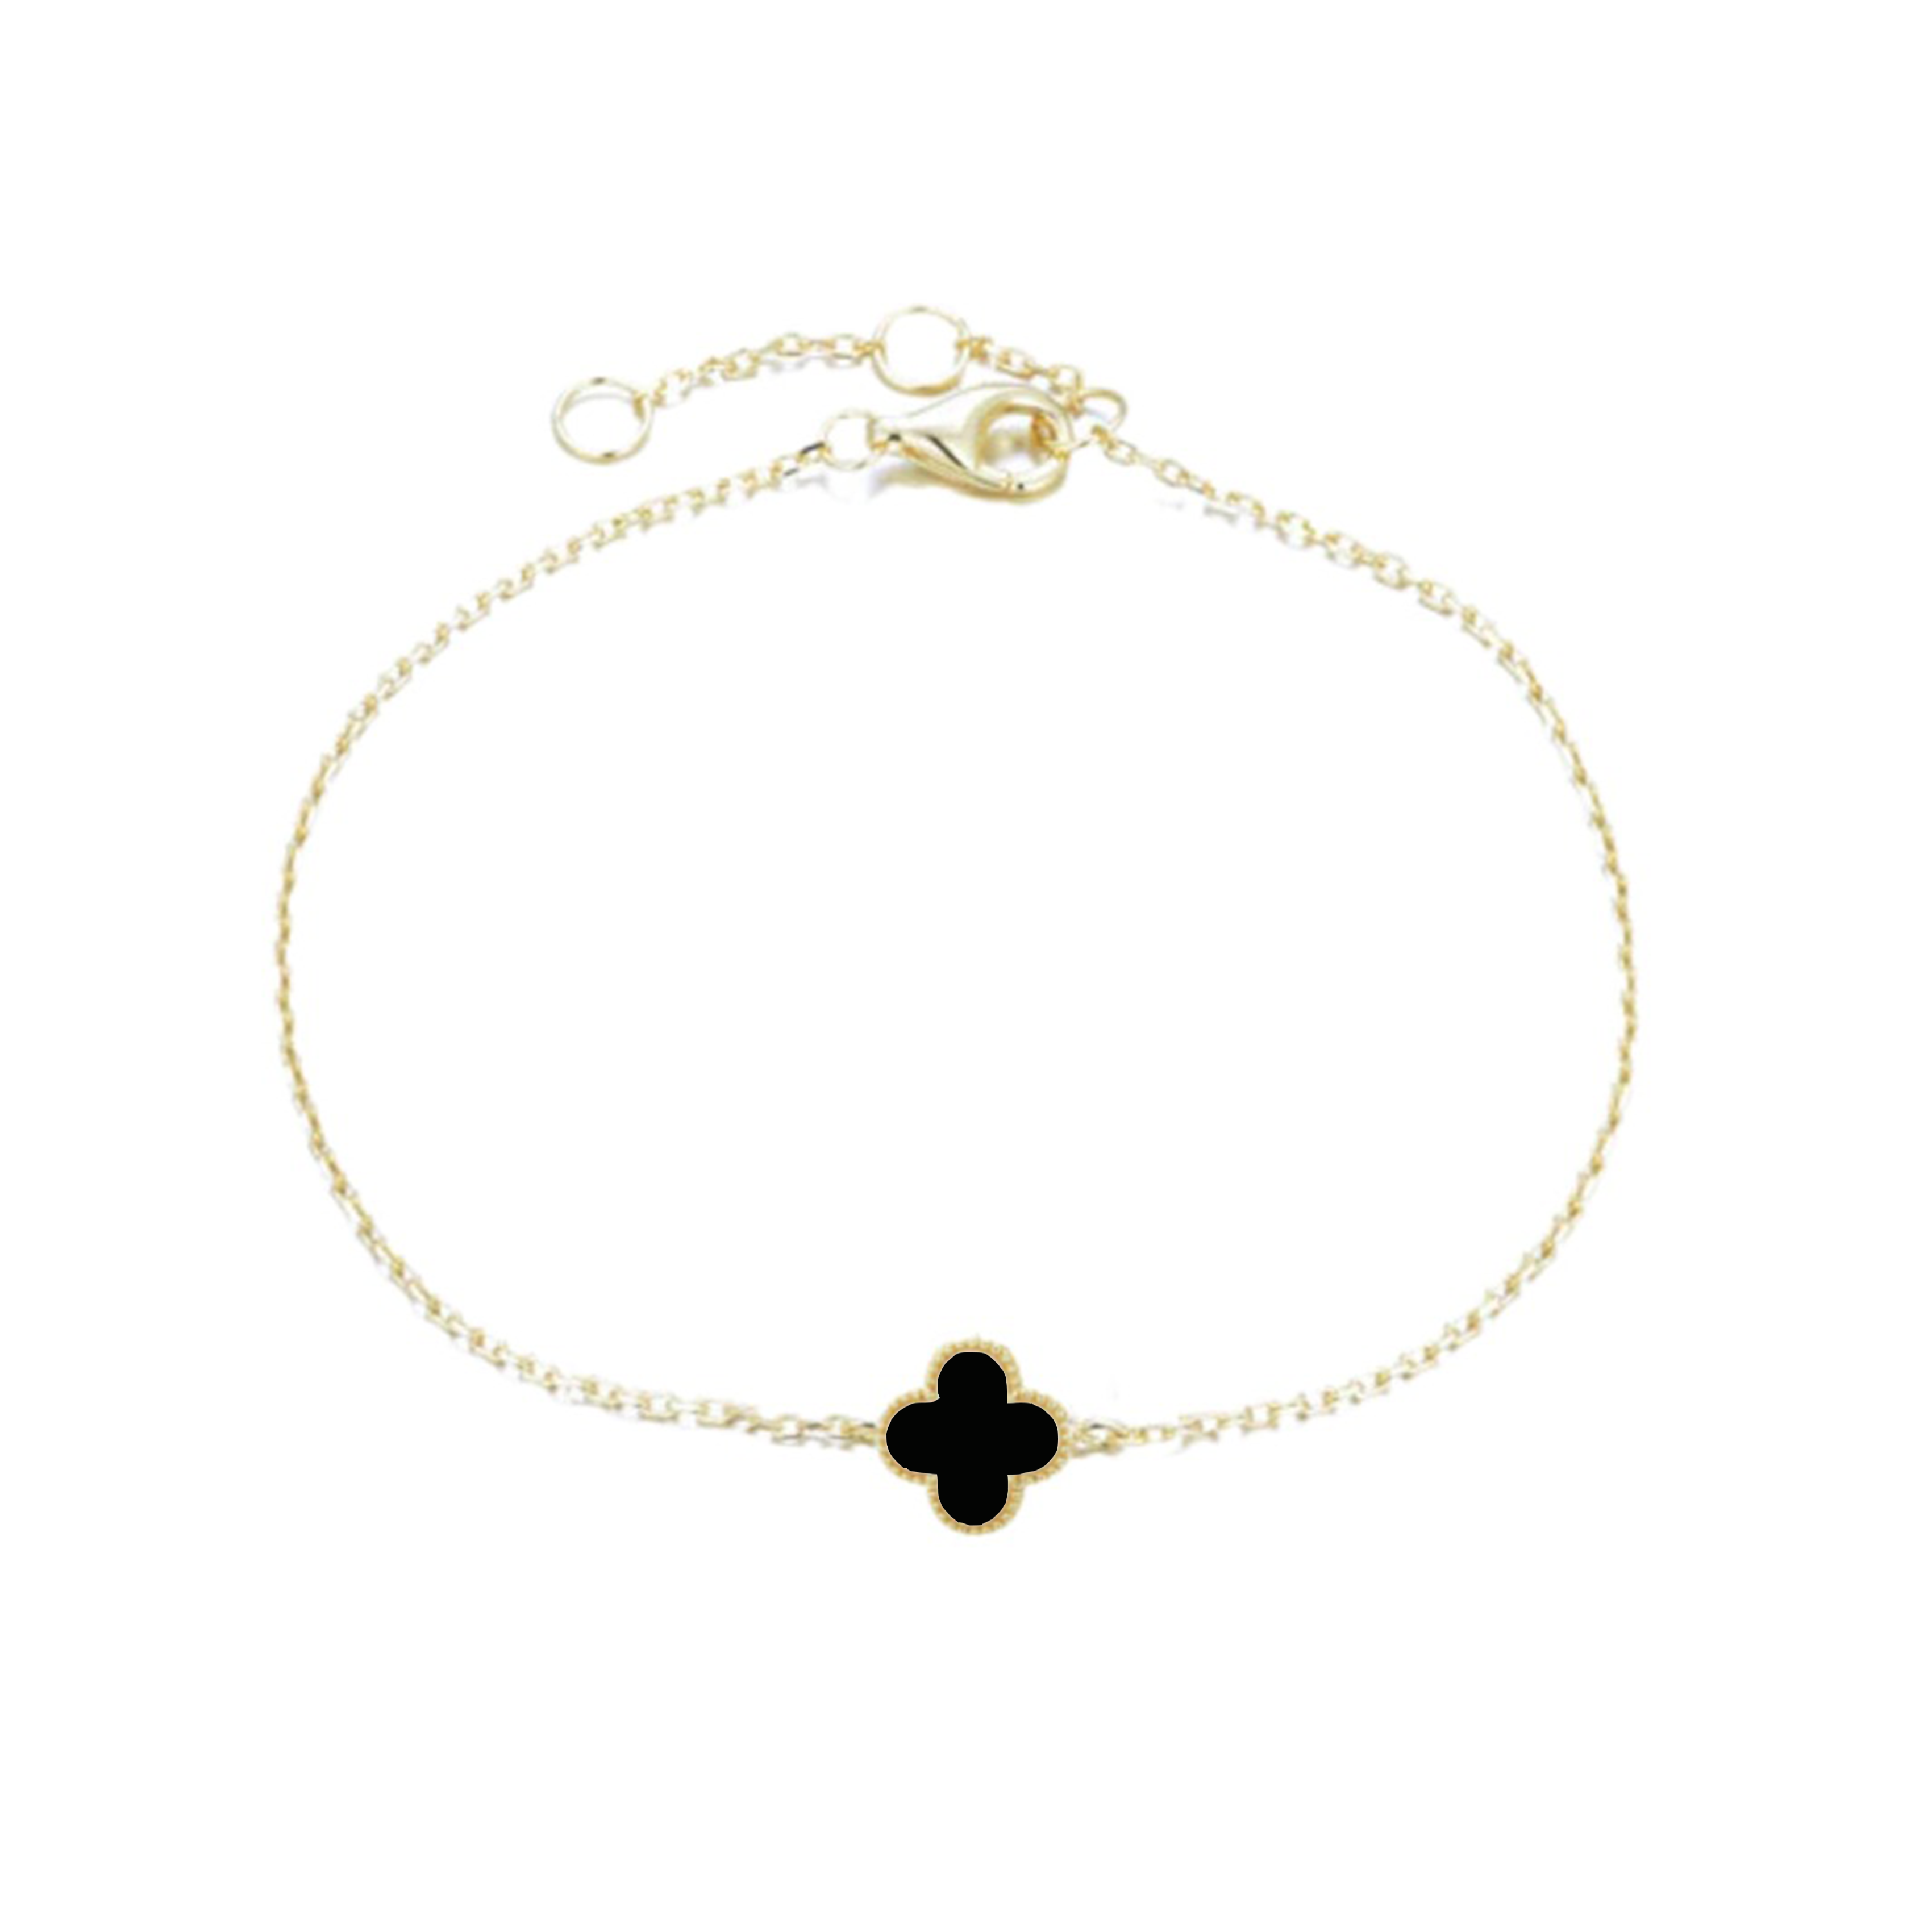 Clover Bracelet with Black Onyx (Gold) (Small)